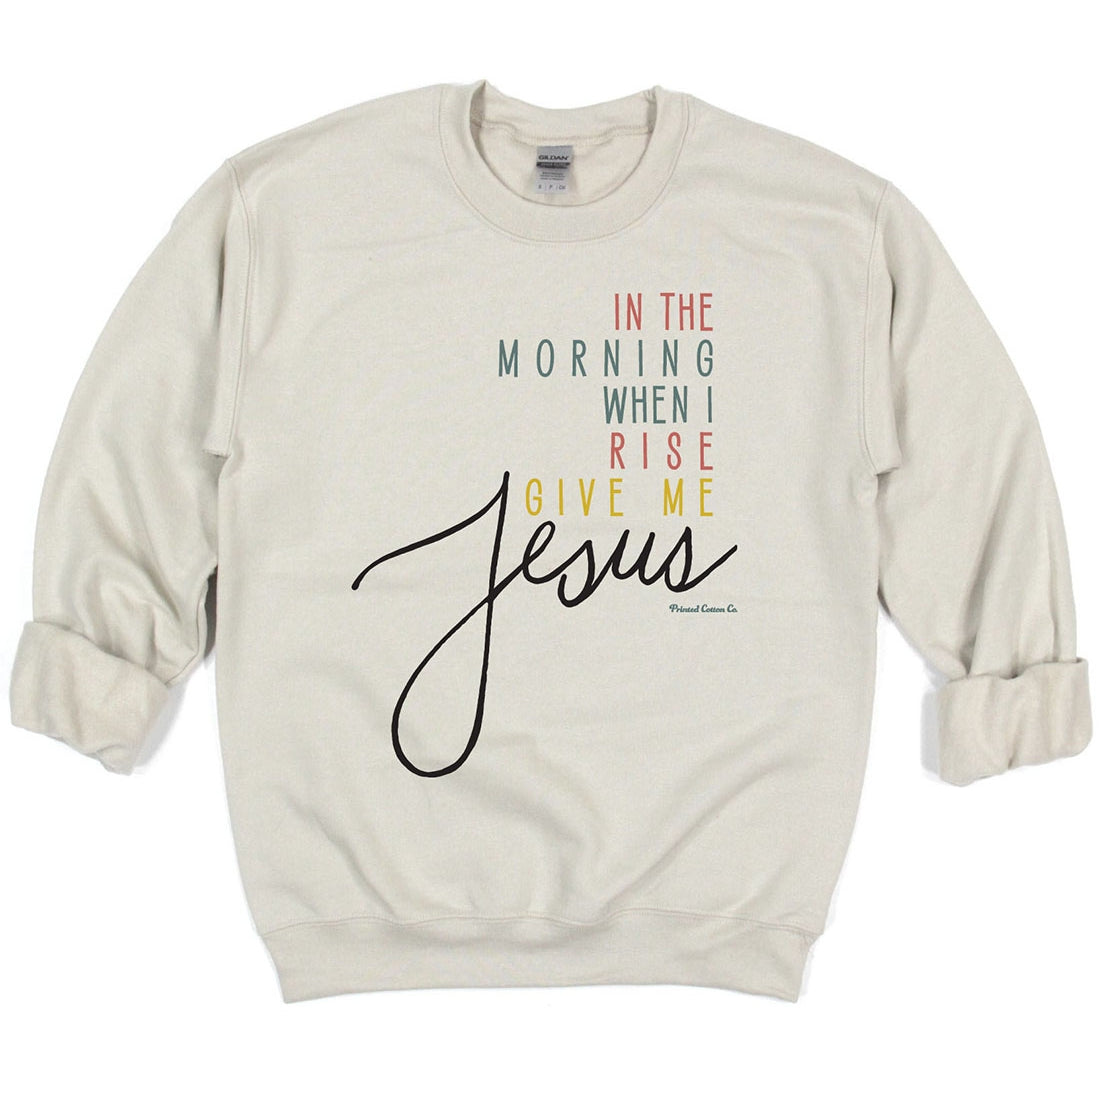 In The Morning When I Rise Give Me Jesus Long Sleeve Sweatshirt